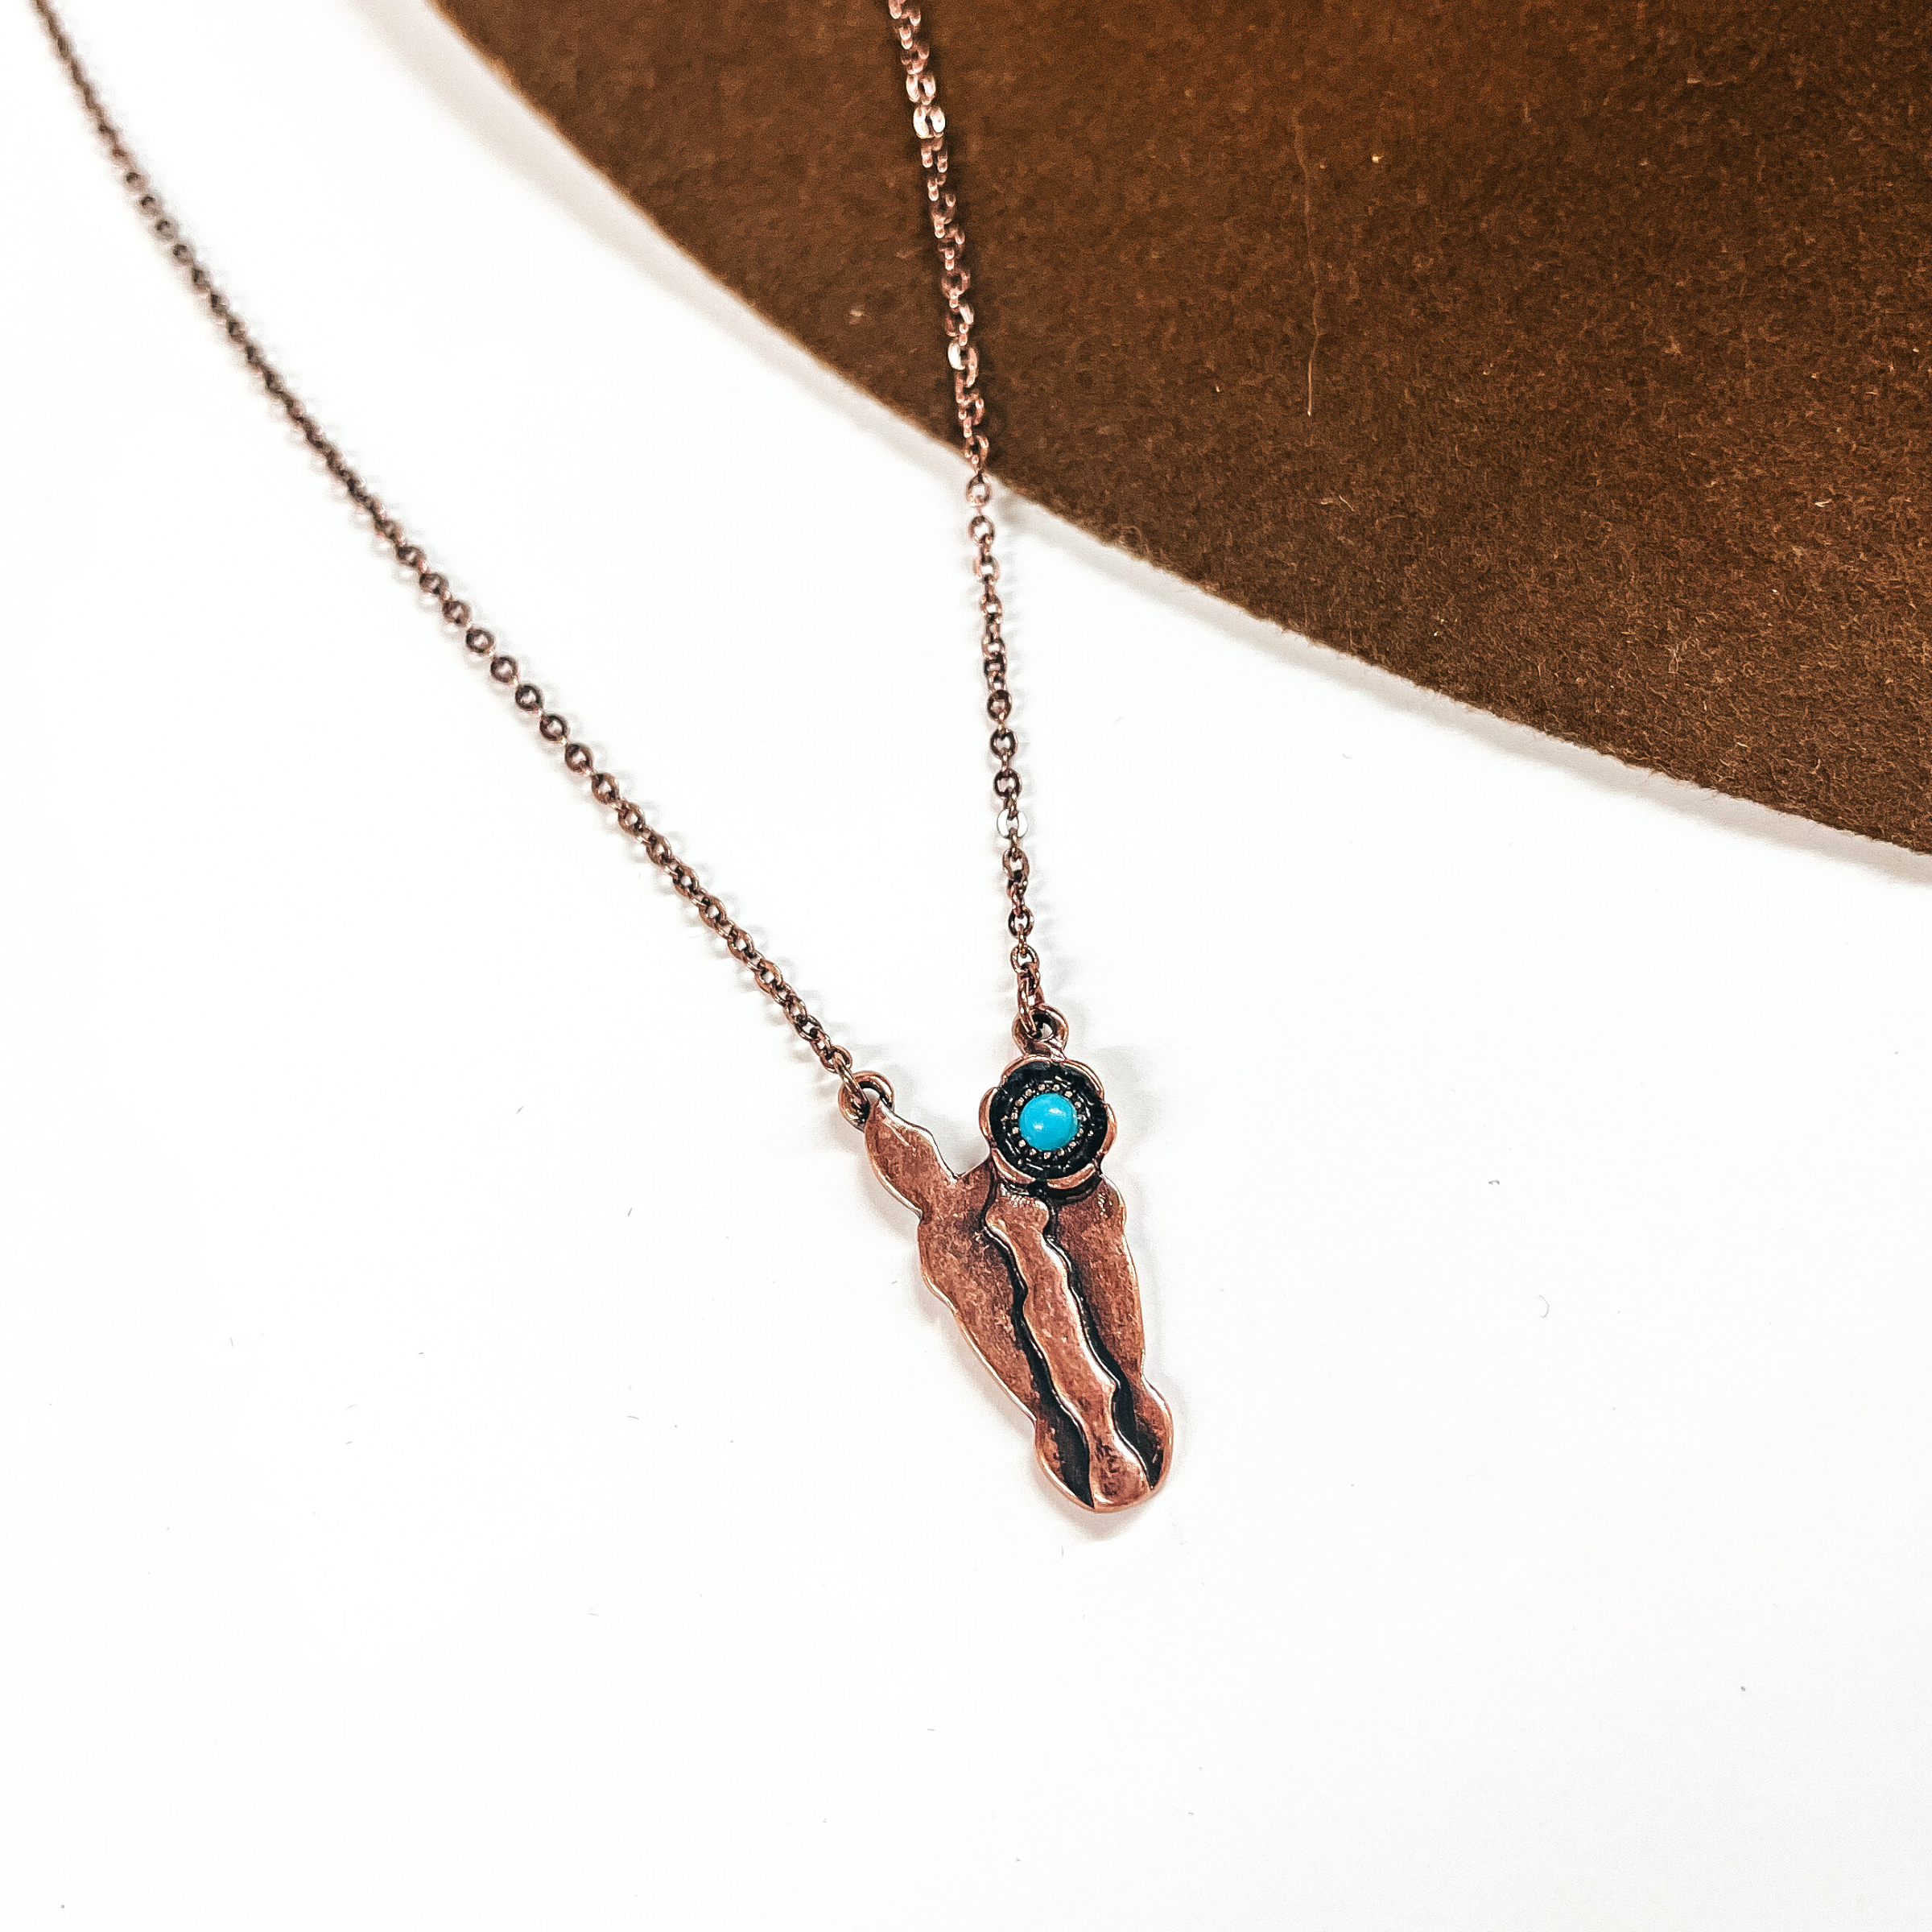 This is a copper chain necklace with a horse head pendant, has a small turquoise stone on one ear. This necklace is taken on a white background and on a dakr brown felt hat brim.